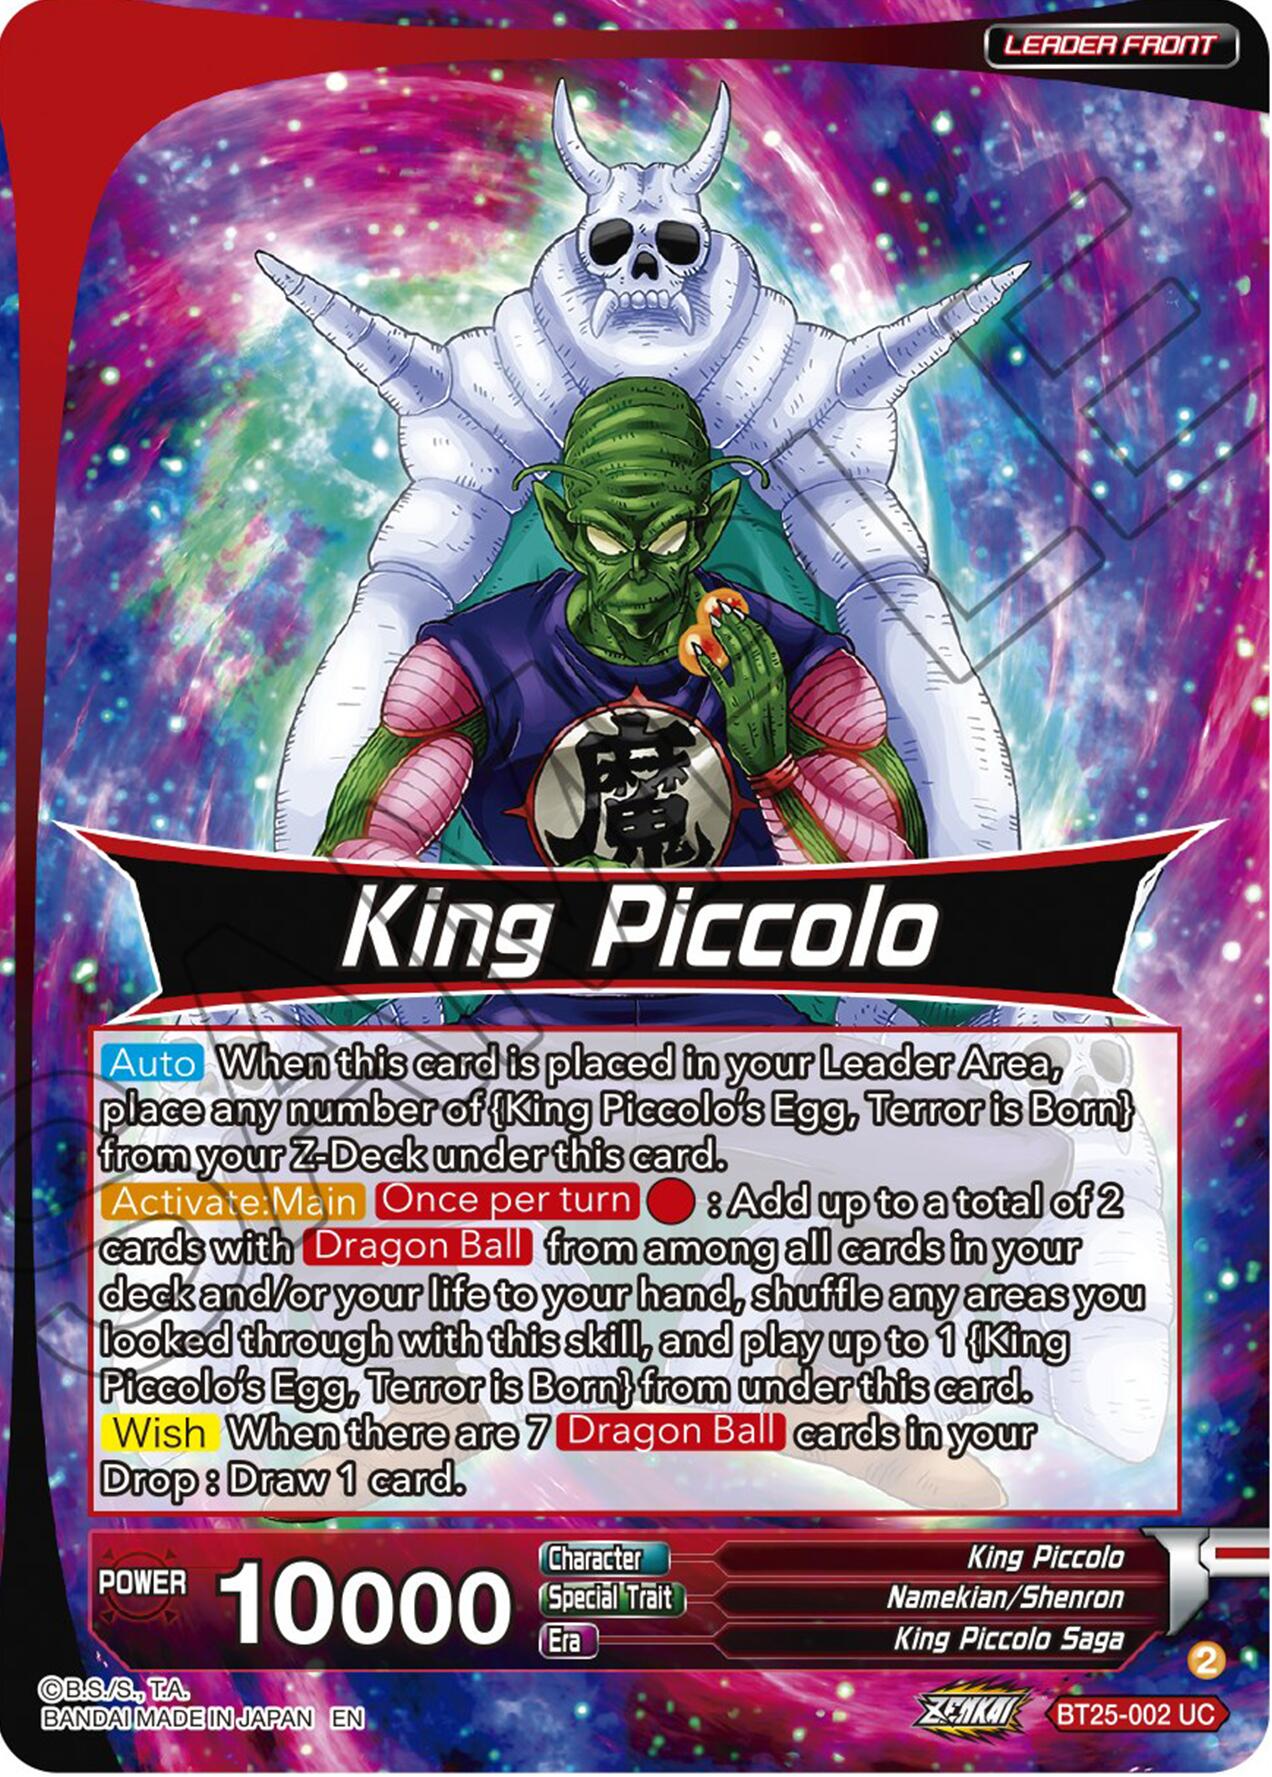 King Piccolo // King Piccolo, Final Stage of Conquest (BT25-002) [Legend of the Dragon Balls] | Total Play